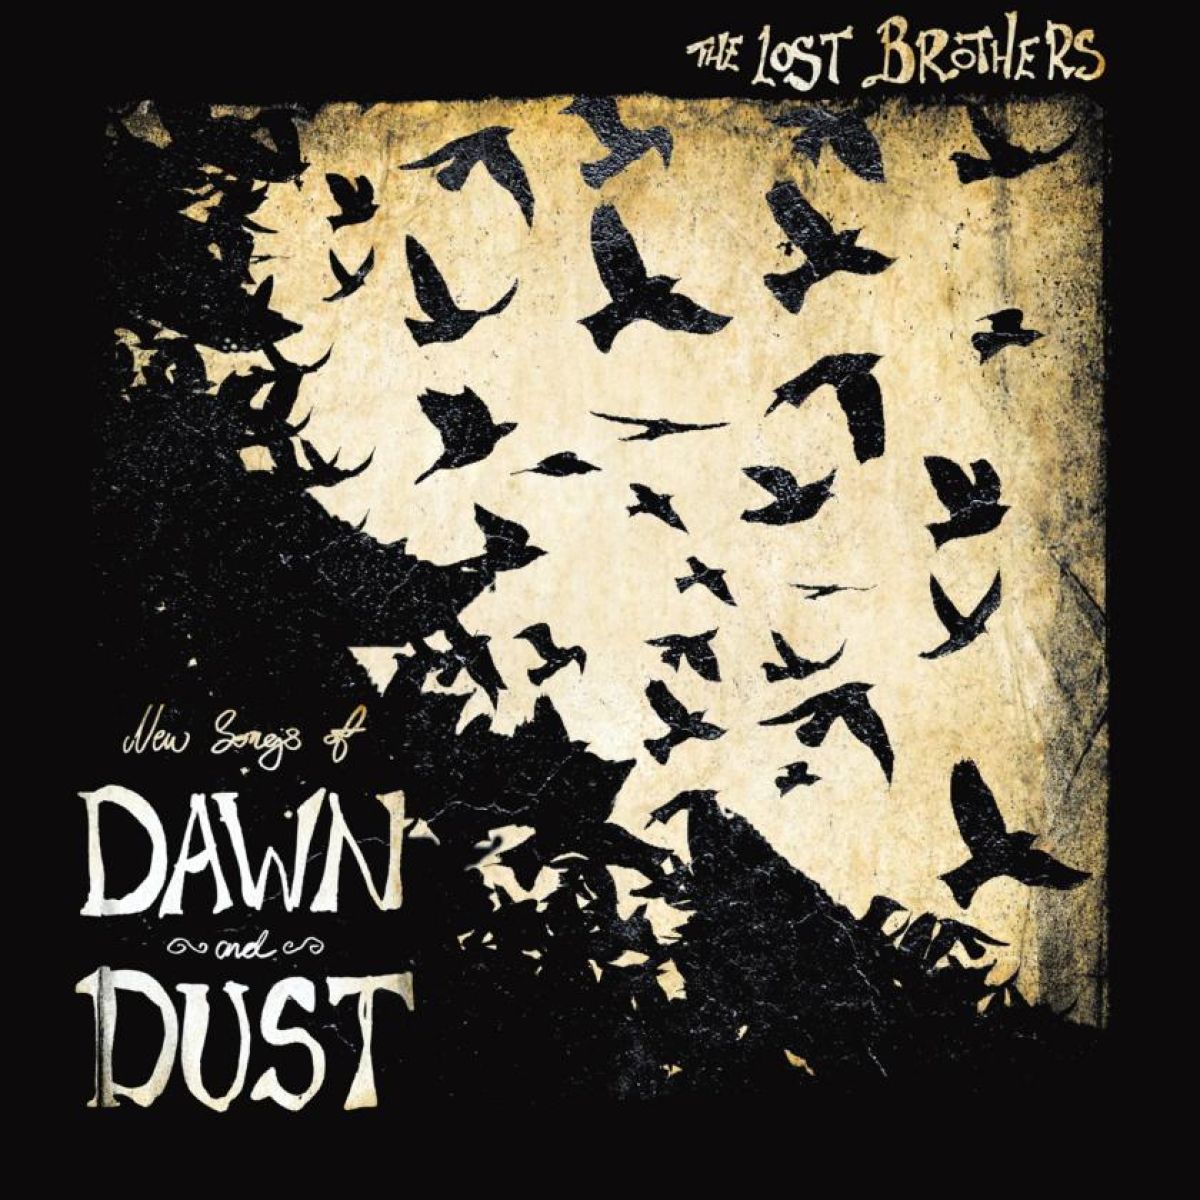 THE LOST BROTHERS – New Songs Of Dawn And Dust - CD